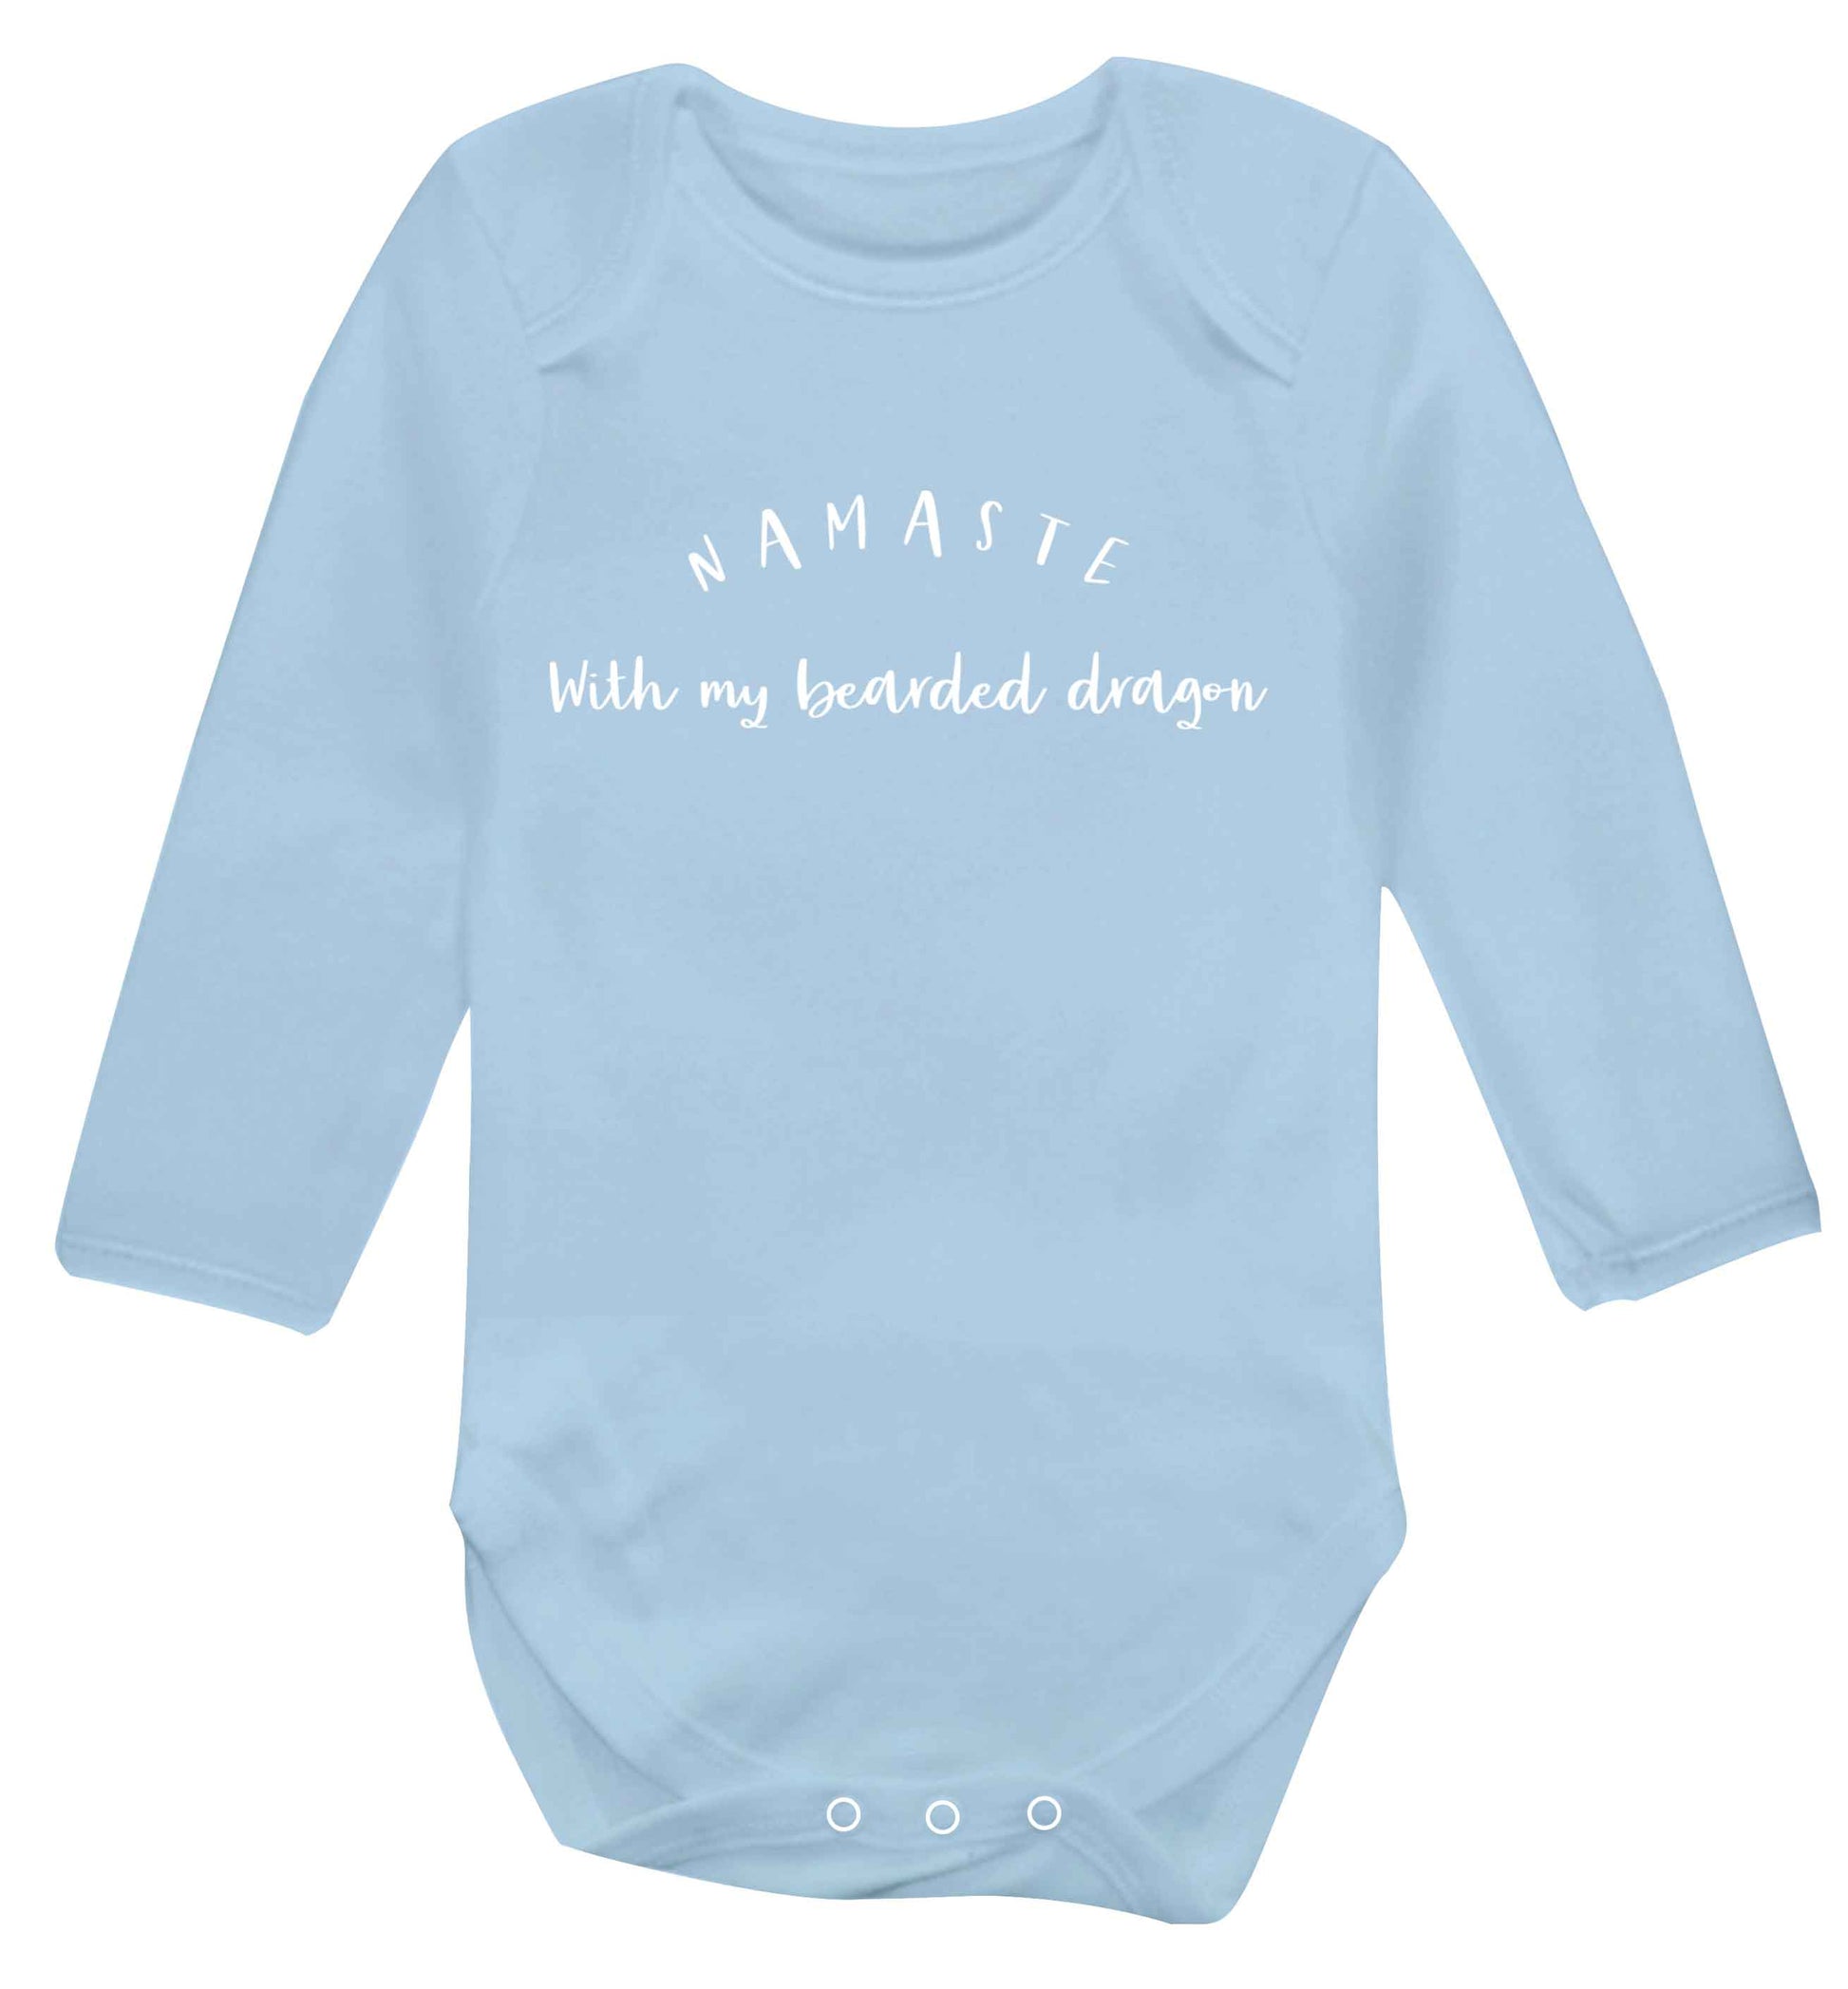 Namaste with my bearded dragon Baby Vest long sleeved pale blue 6-12 months